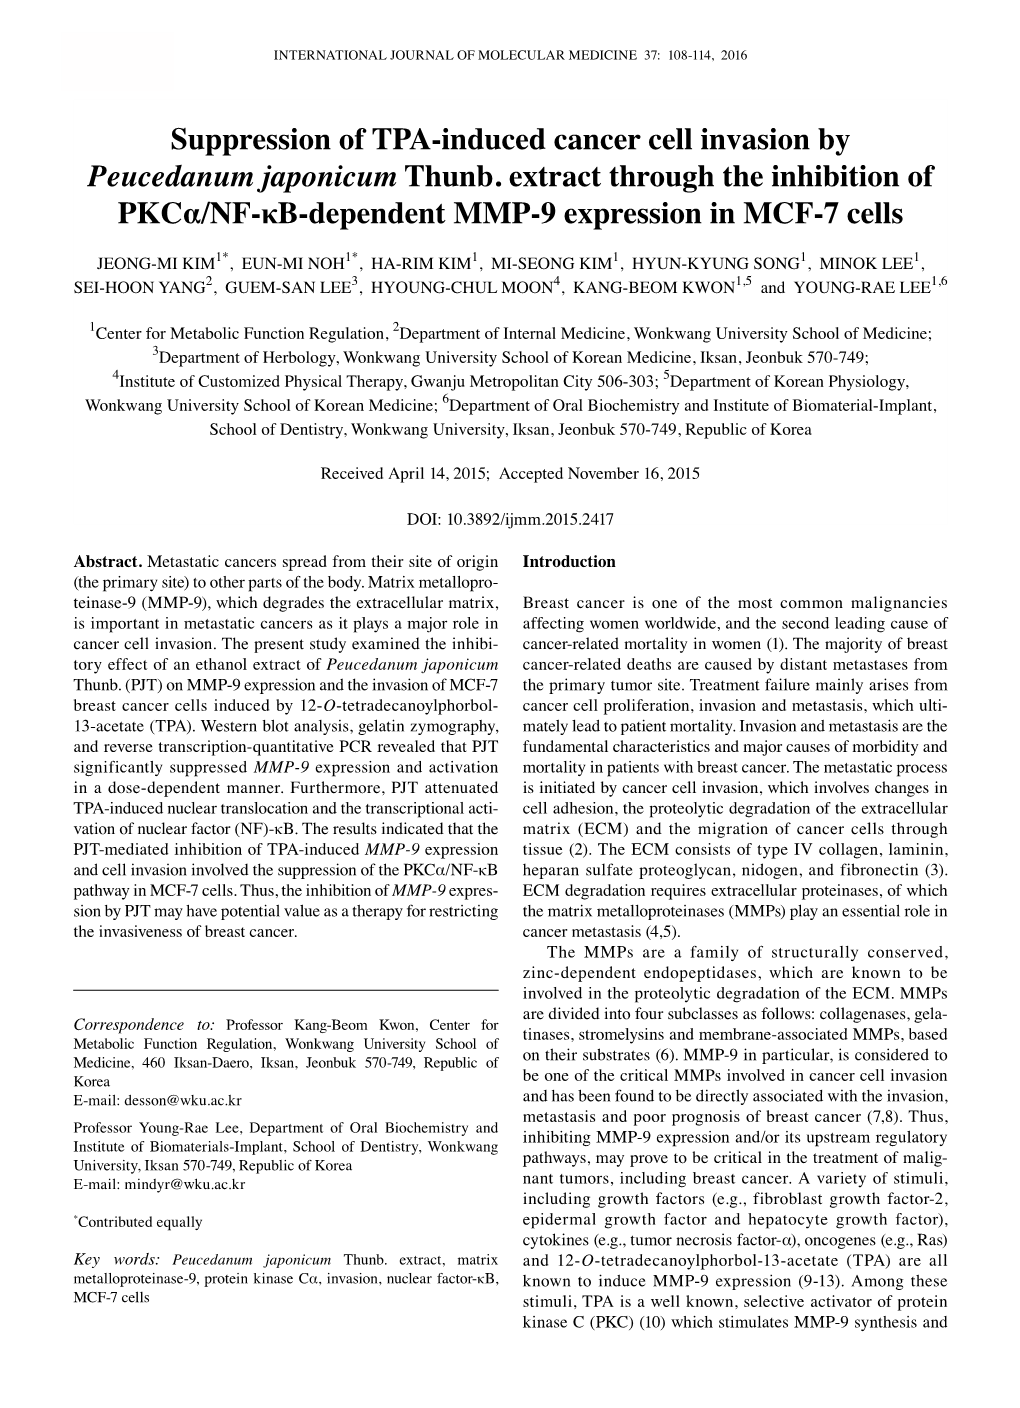 Suppression of TPA-Induced Cancer Cell Invasion by Peucedanum Japonicum Thunb. Extract Through the Inhibition of Pkcα/NF-Κb-Dependent MMP-9 Expression in MCF-7 Cells